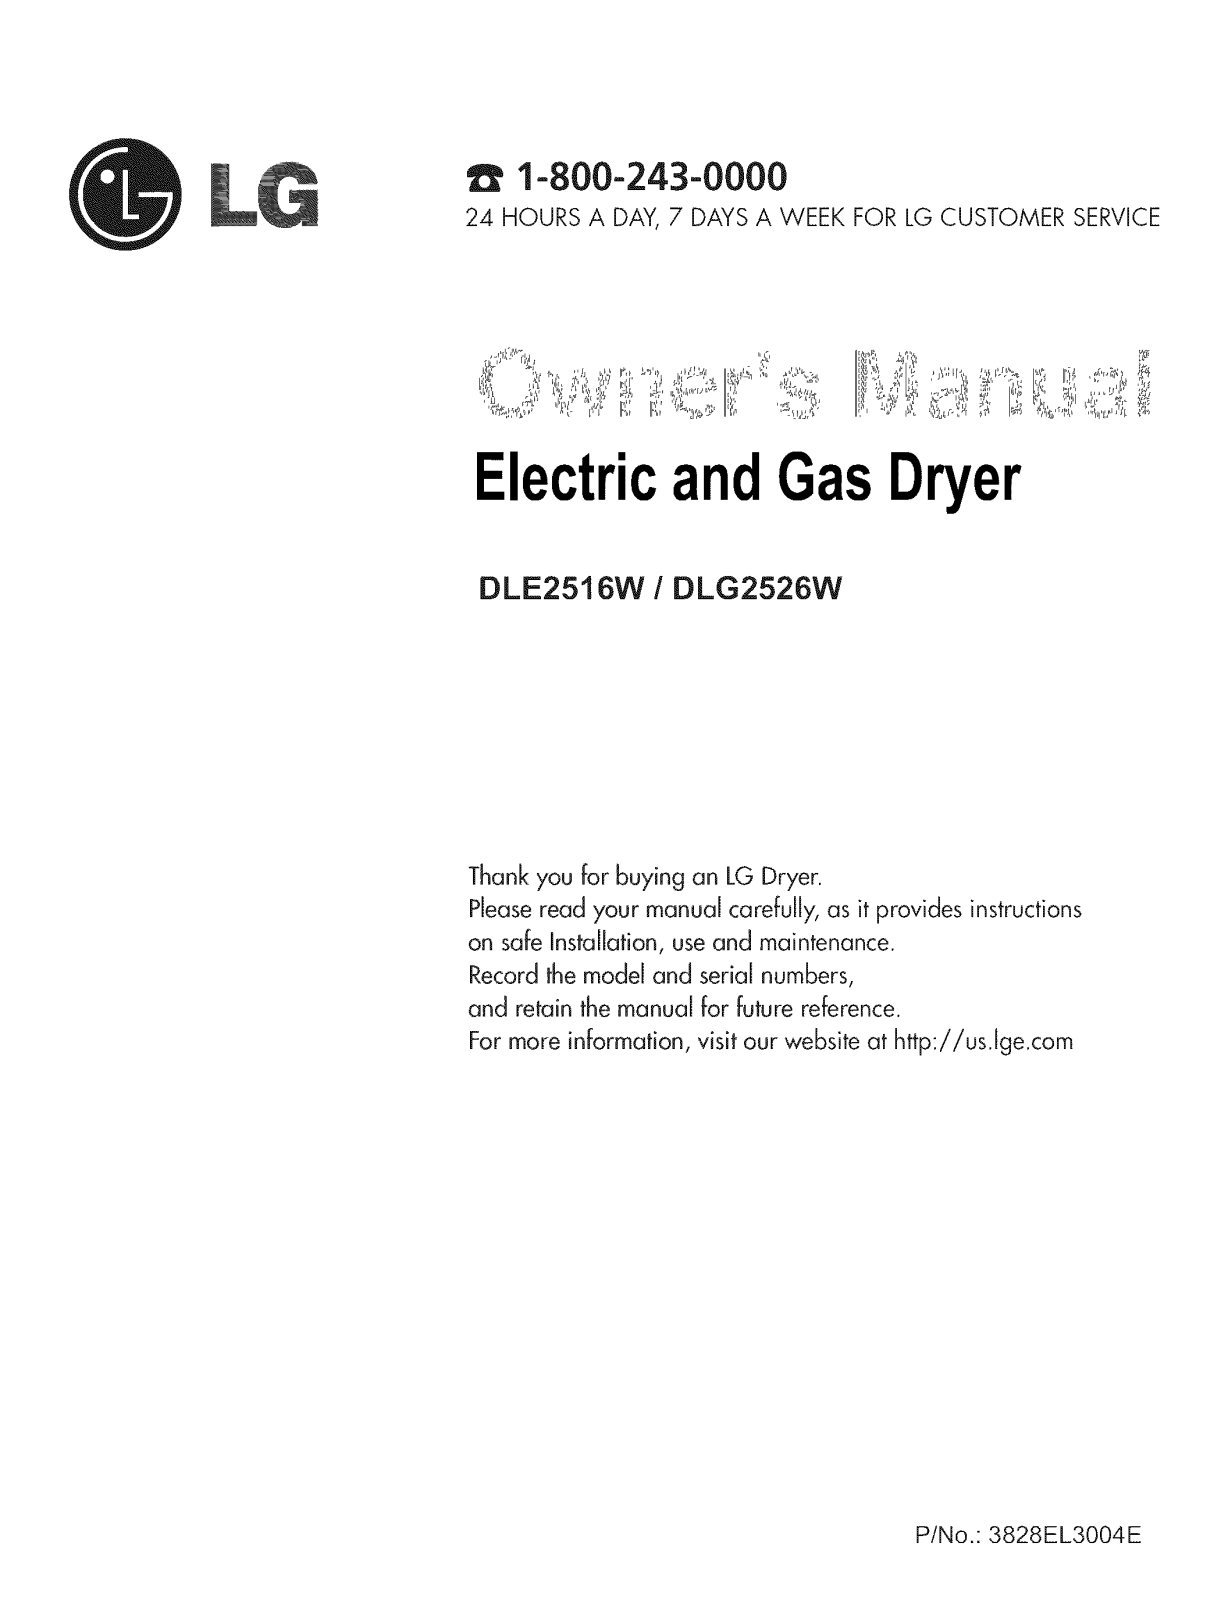 LG DLG2526W/00, DLE2516W Owner’s Manual